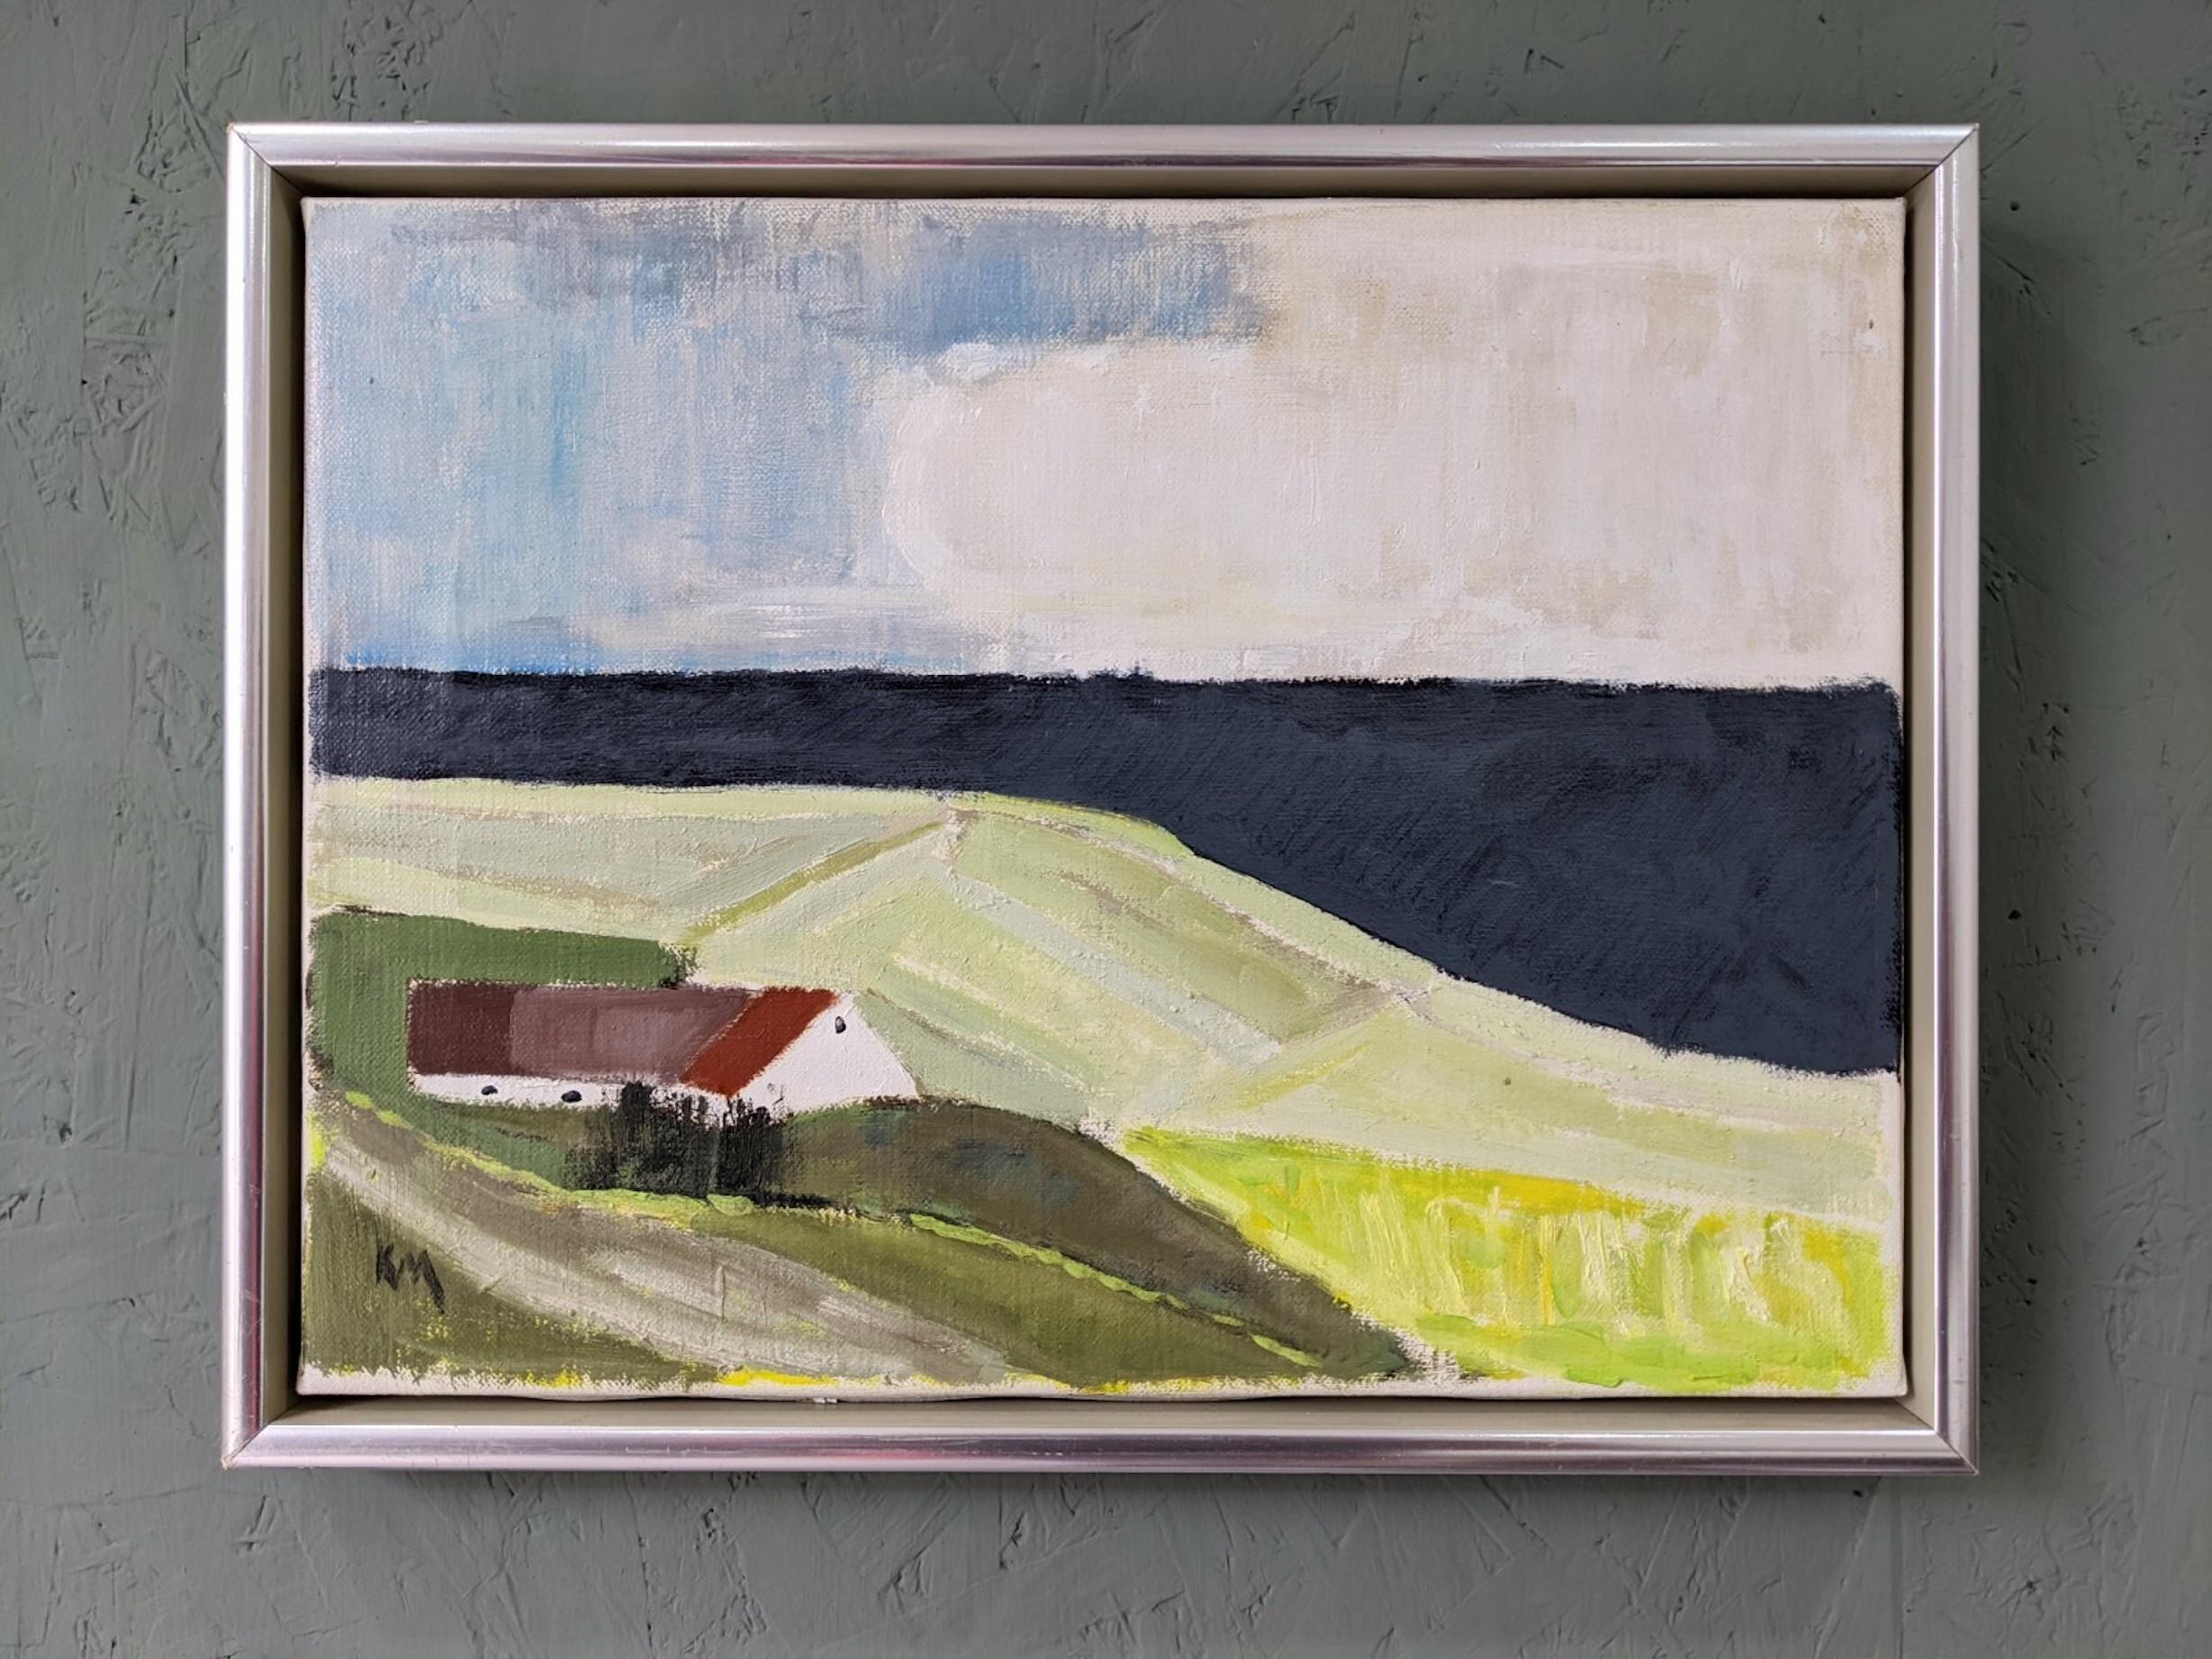 Farmhouse by the Sea
Size: 33 x 43 cm (including frame)
Oil on canvas

A very inviting and expressive modernist coastal landscape composition, executed in oil onto canvas.

This beautiful and scenic composition of nature has been separated into